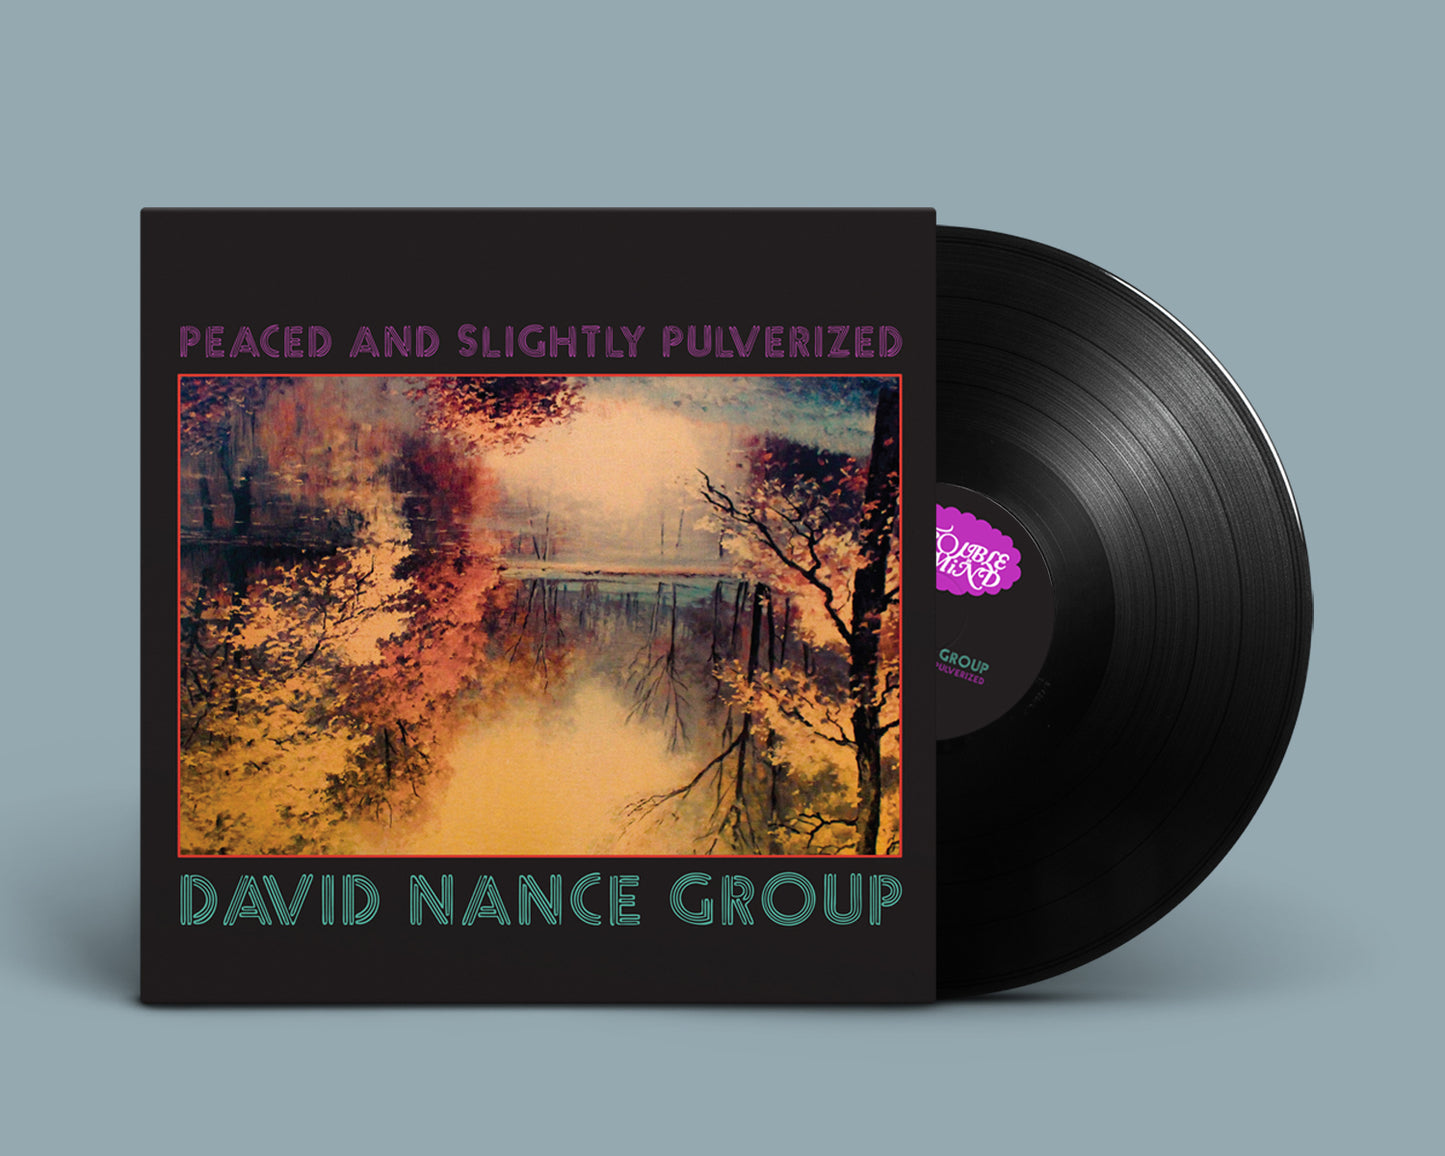 David Nance Group - Peaced and Slightly Pulverized